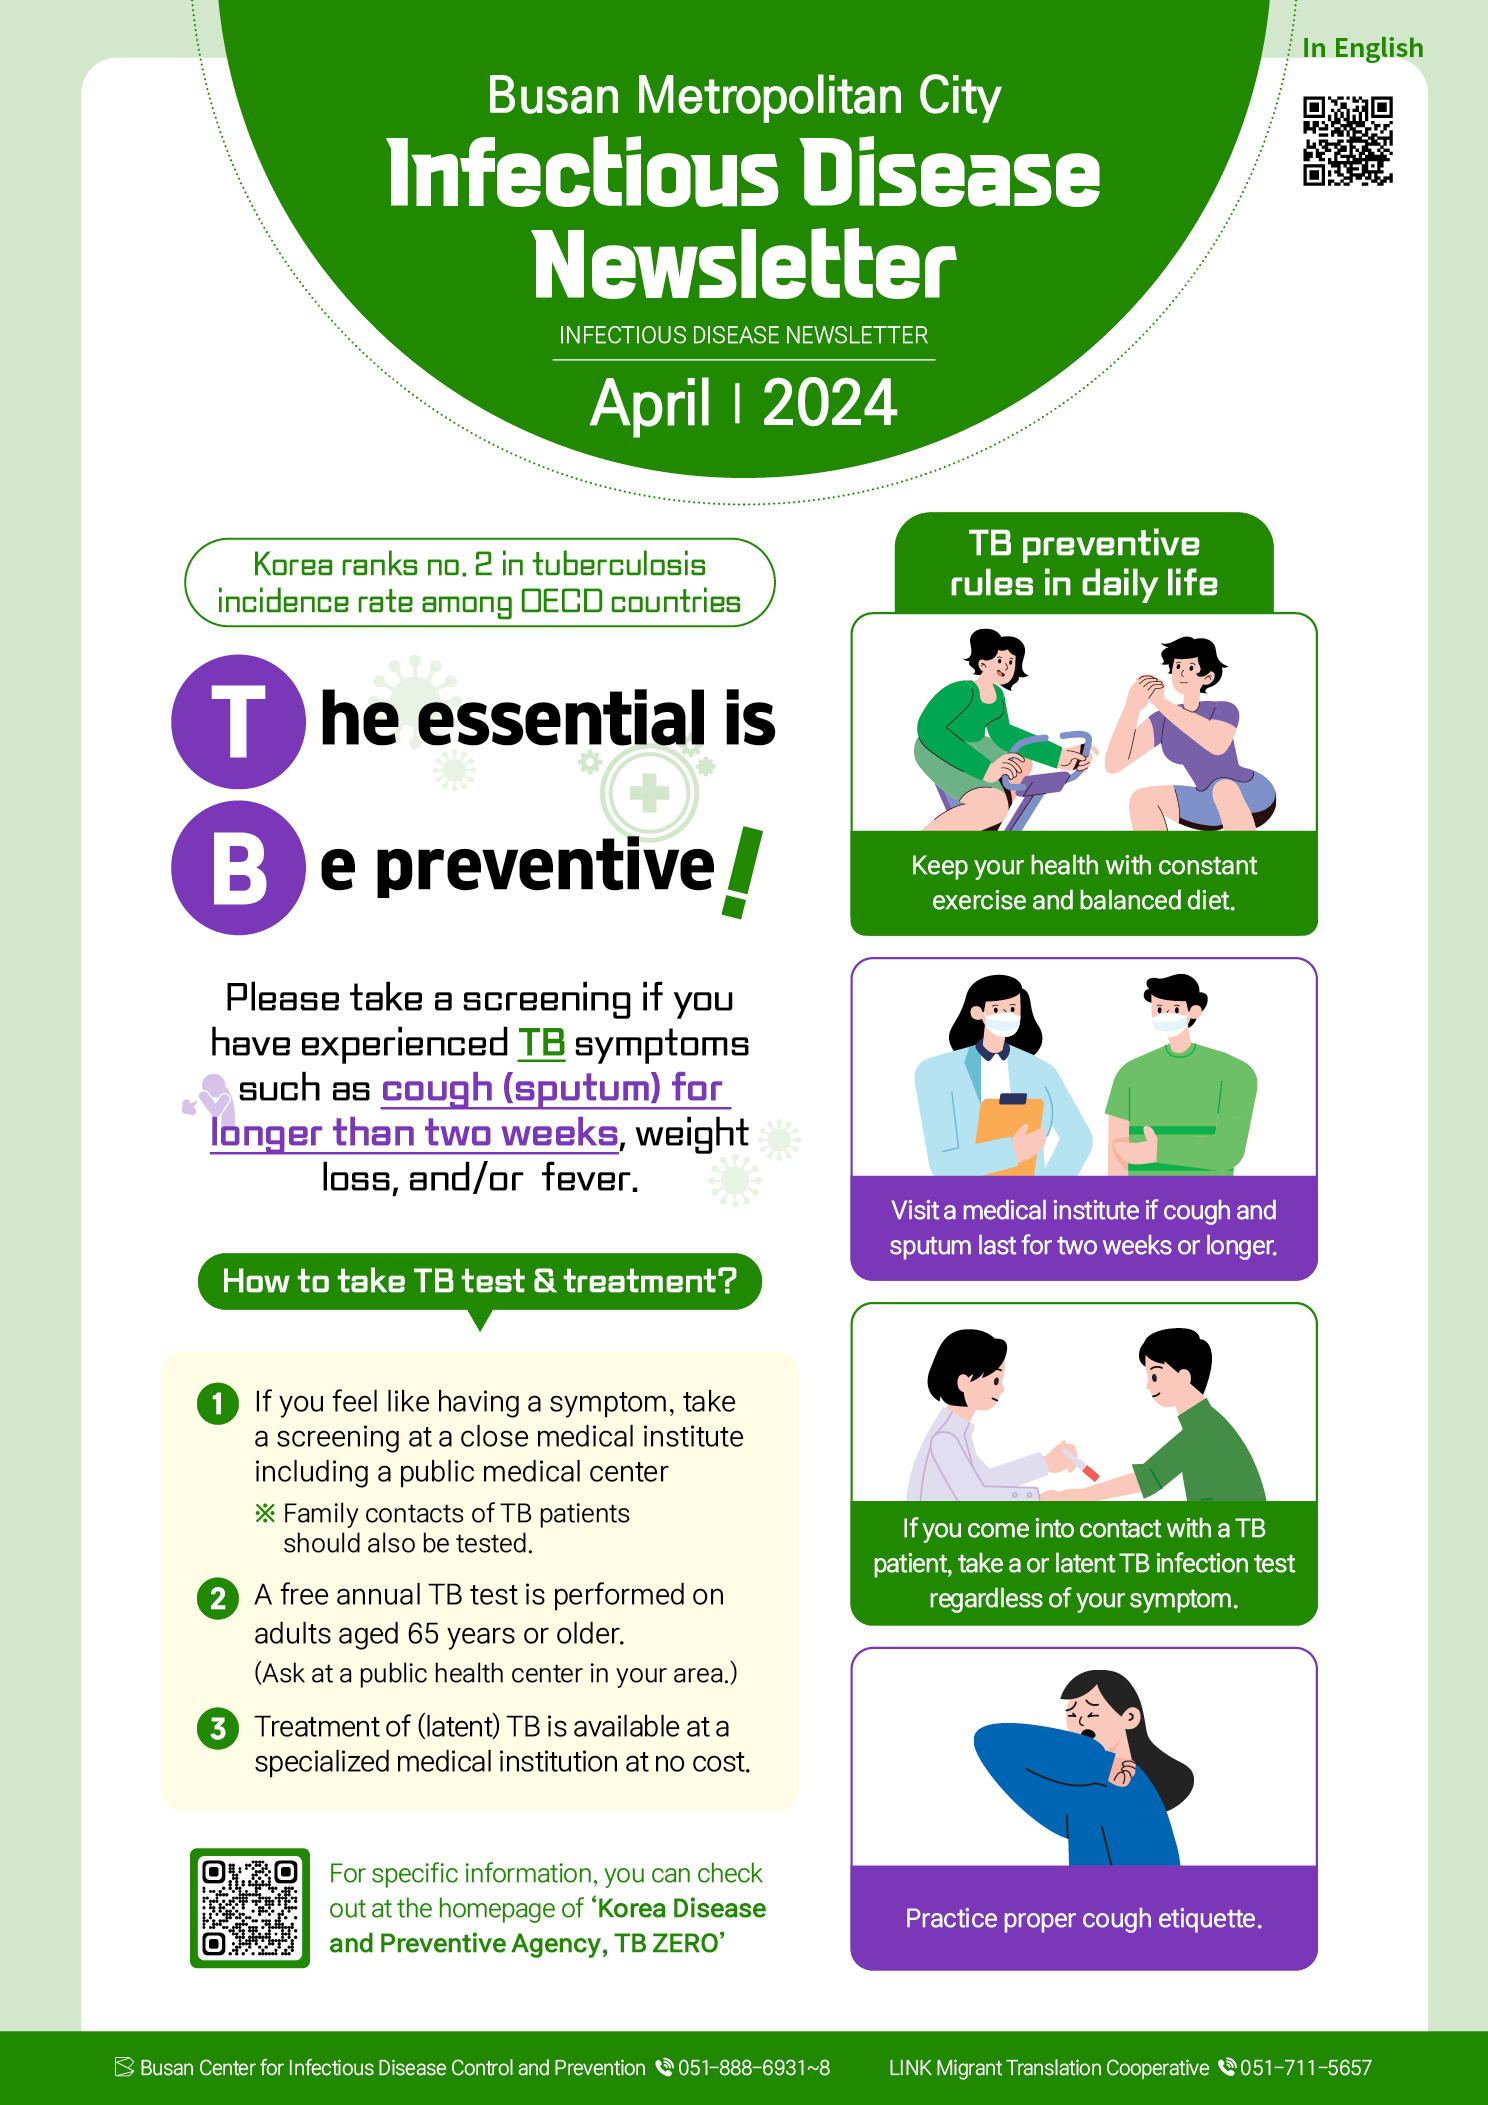 Busan Metropolitan City Infectious Disease Newsletter April 2024
Korea ranks no. 2 in tuberculosis incidence rate among OECD countries
The essential is
Be preventive!
Please take a screening if you have experienced TB symptoms such as cough (sputum) for longer than two weeks, weight loss, and/or  fever.
How to take TB test & treatment? 1. If you feel like having a symptom, take a screening at a close medical institute including a public medical center ※ Family contacts of TB patients should also be tested. 2. A free annual TB test is performed on adults aged 65 years or older.(Ask at a public health center in your area.) 3. Treatment of (latent) TB is available at a specialized medical institution at no cost.
TB preventive rules in daily life
Keep your health with constant exercise and balanced diet.
Visit a medical institute if cough and sputum last for two weeks or longer.
If you come into contact with a TB patient, take a or latent TB infection test regardless of your symptom.
Practice proper cough etiquette.
Busan Center for Infectious Disease Control and Prevention 051-888-6931~8 
LINK Migrant Translation Cooperative 051-711-5657 사진0